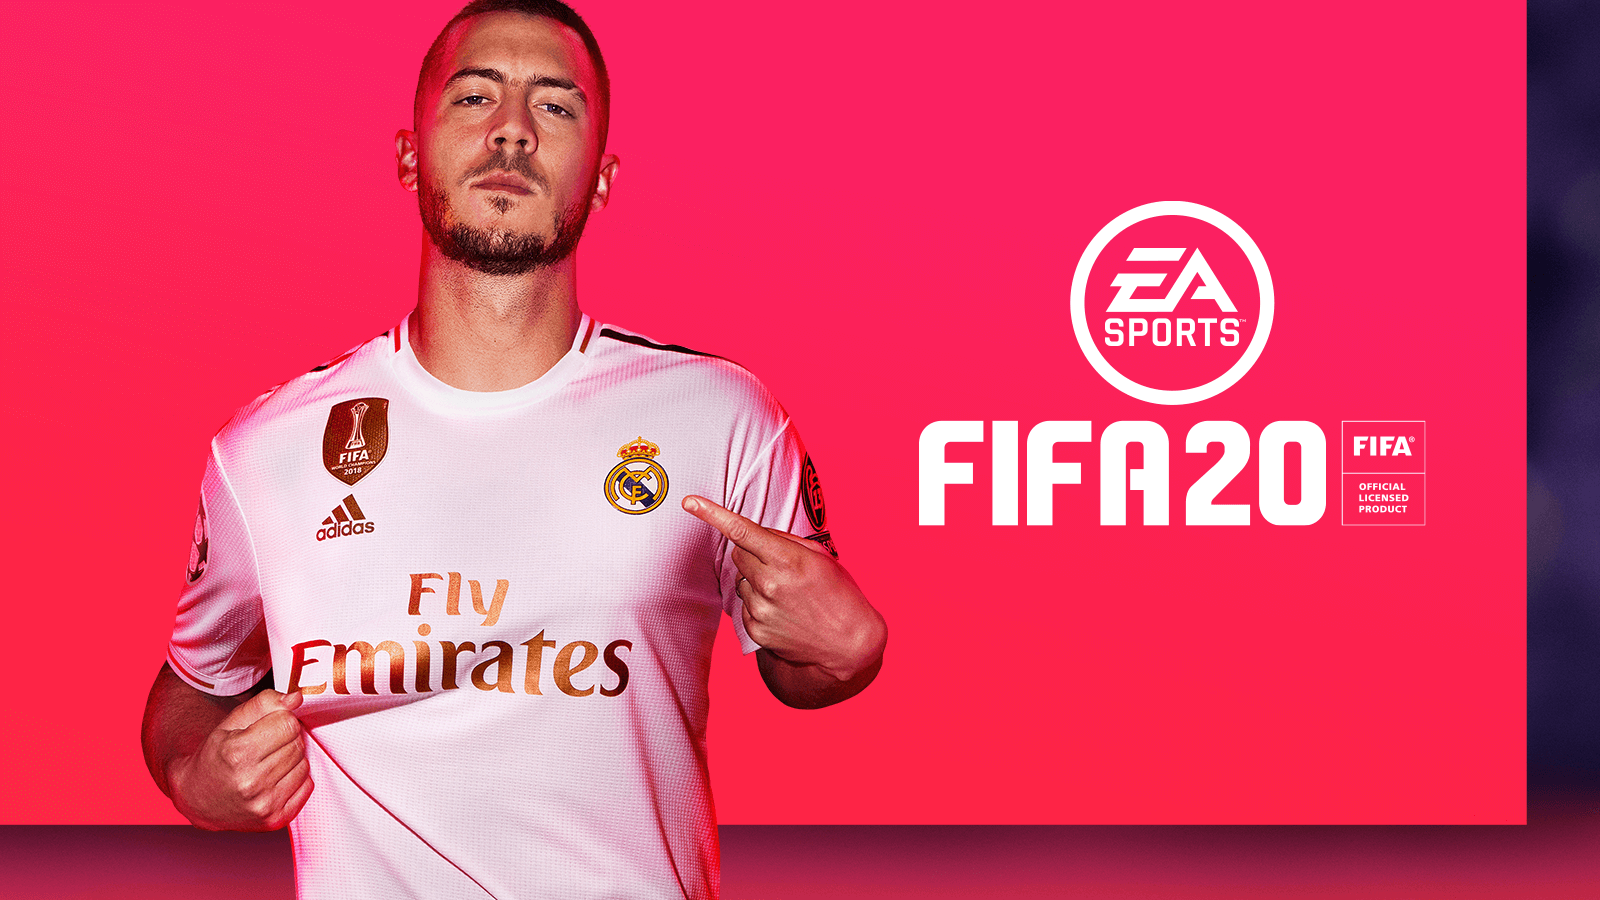 FIFA 20 Available the cover and wallpapers by Premier League   FifaUltimateTeamit  UK